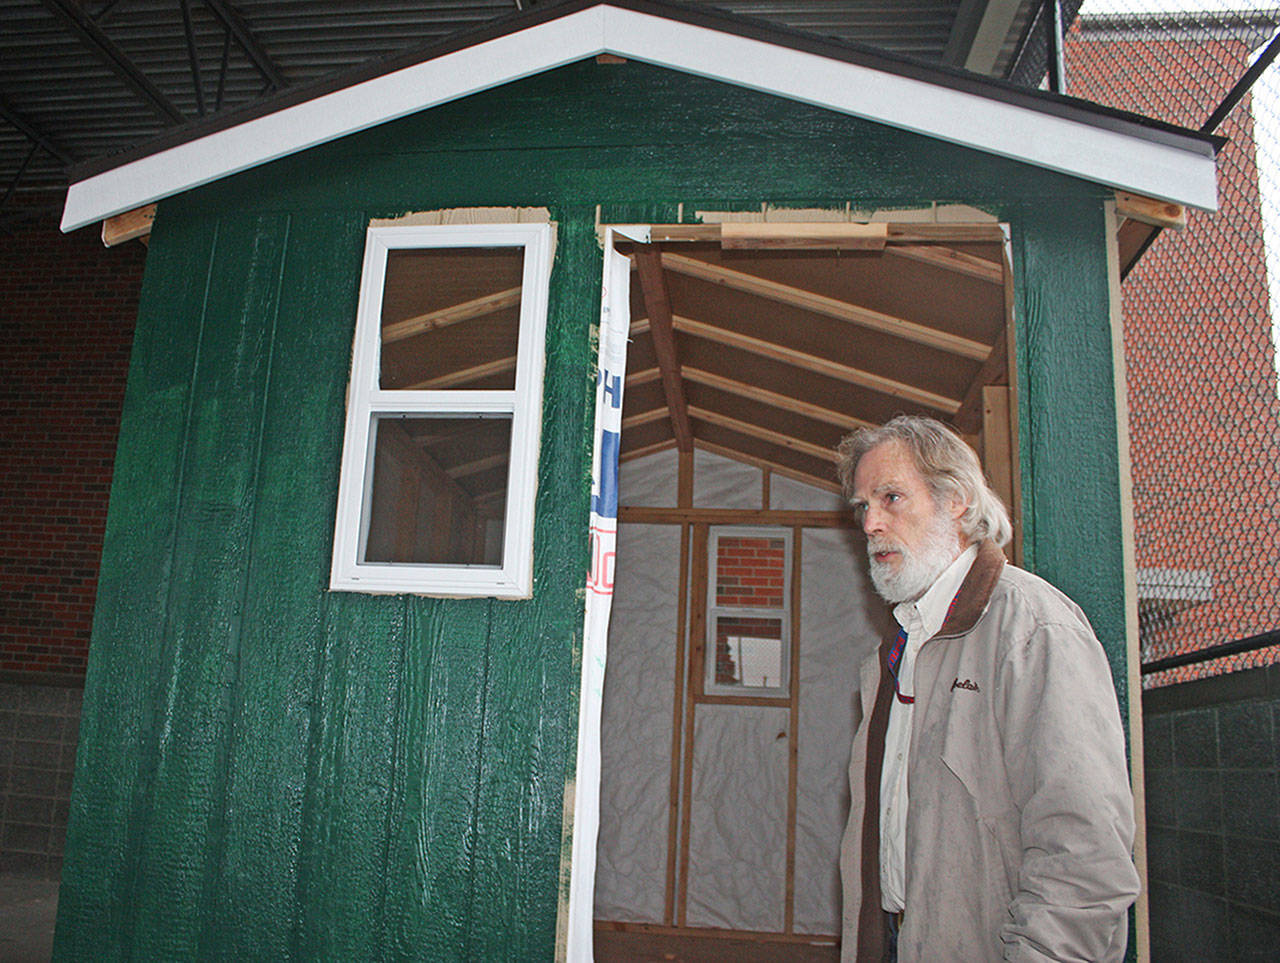 Jack McCarley’s students at Auburn High School have been busy assembling an 8-by-12-foot, portable, energy-efficient homeless shelter for a statewide competition. MARK KLAAS, Auburn Reporter